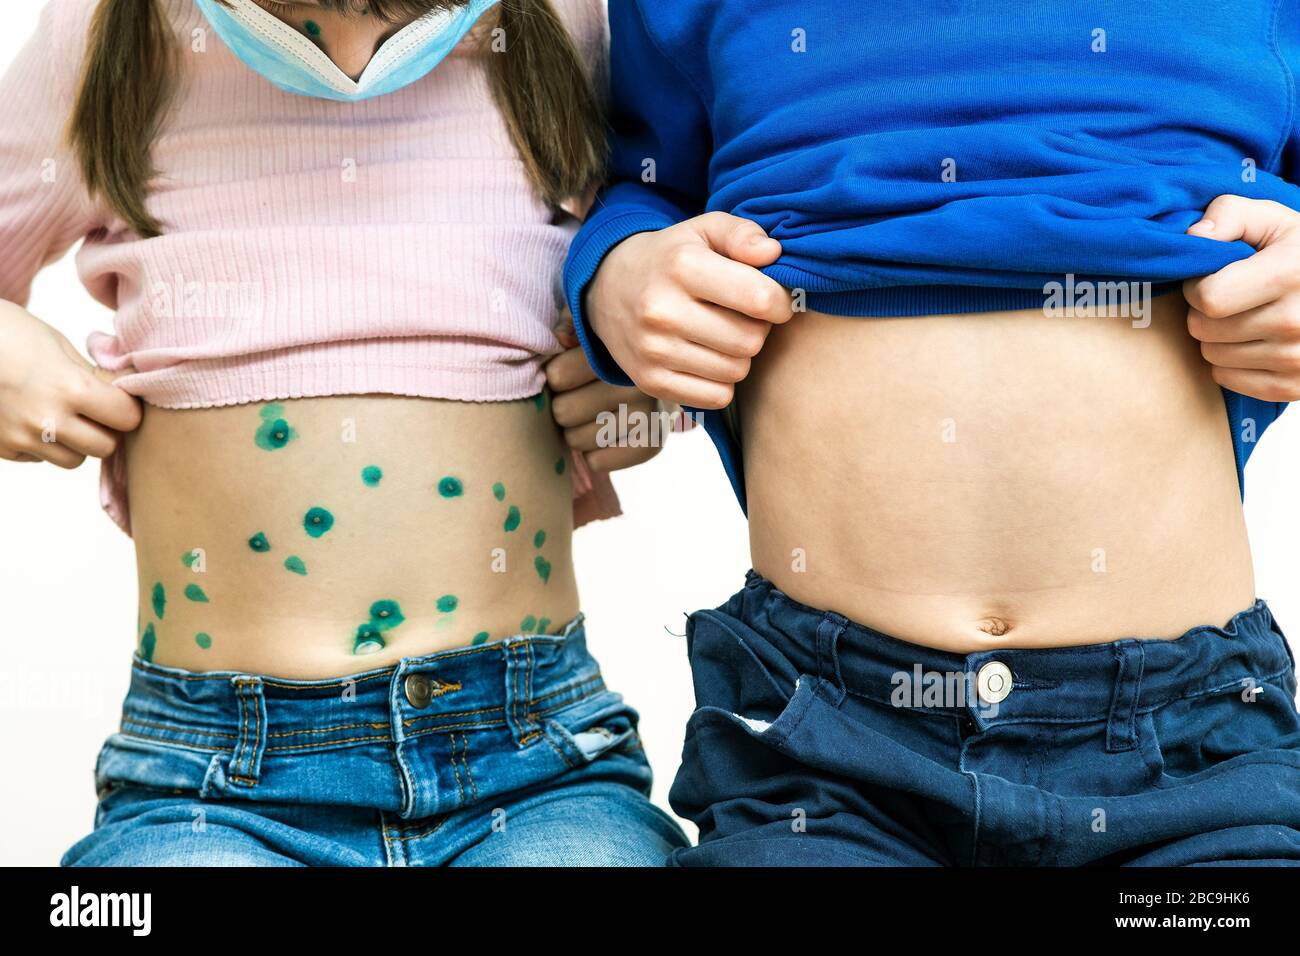 Children covered with green rashes on stomach ill with chickenpox, measles or rubella virus. Stock Photo